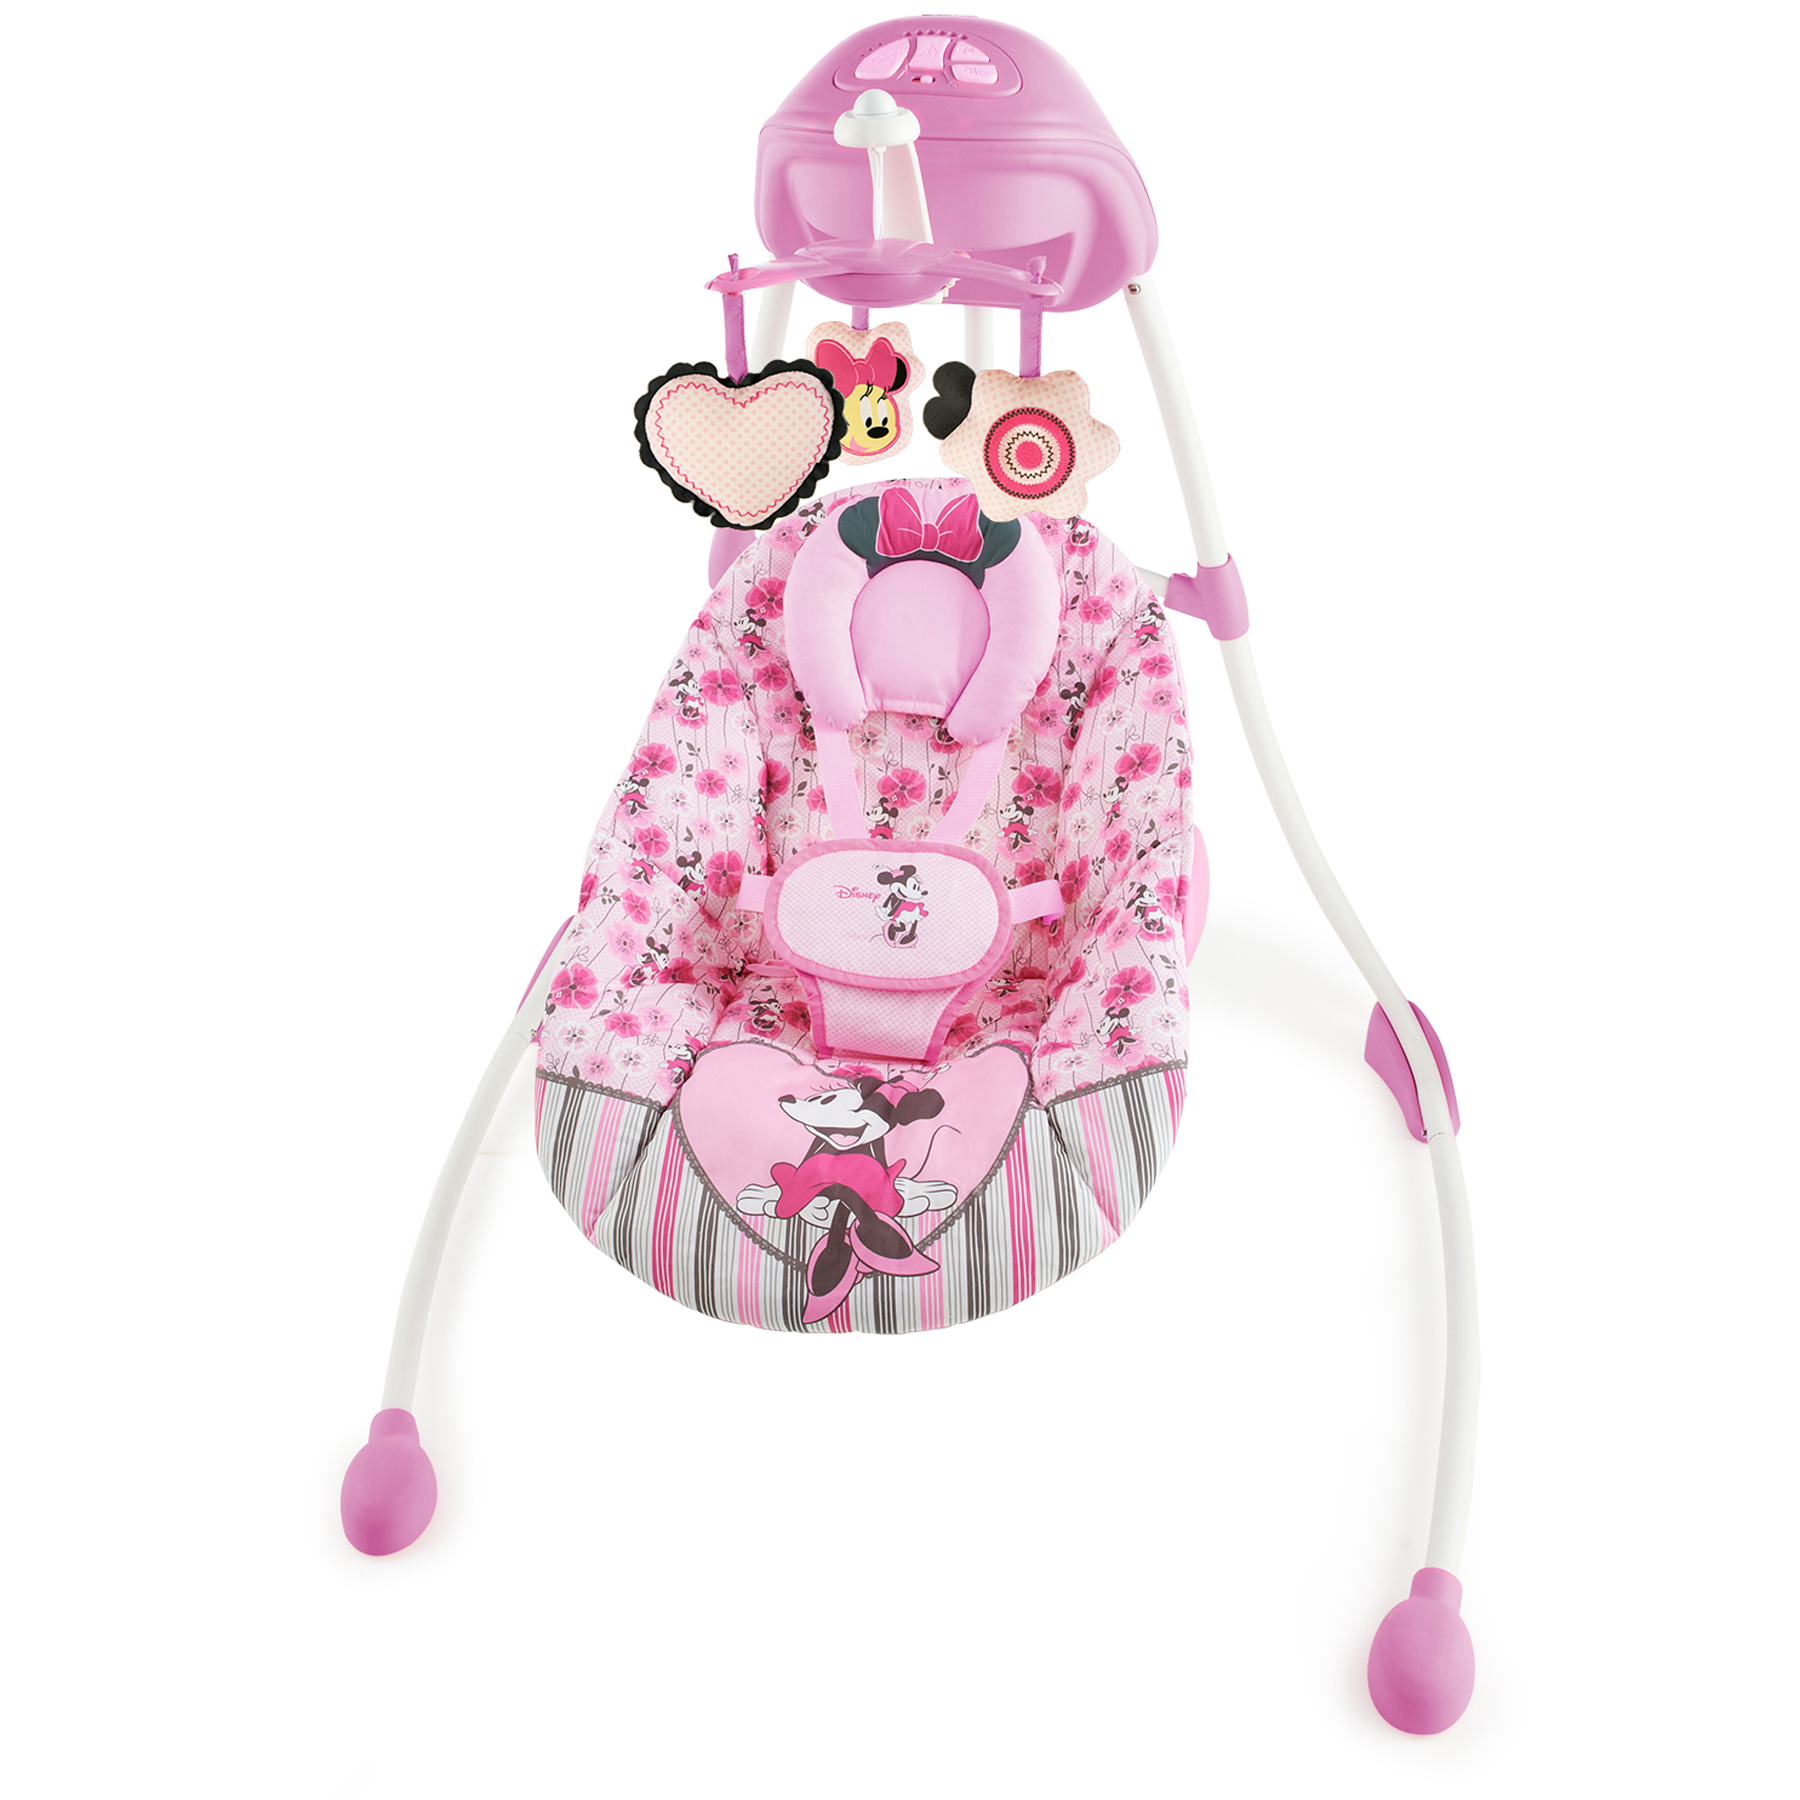 minnie mouse garden delight swing